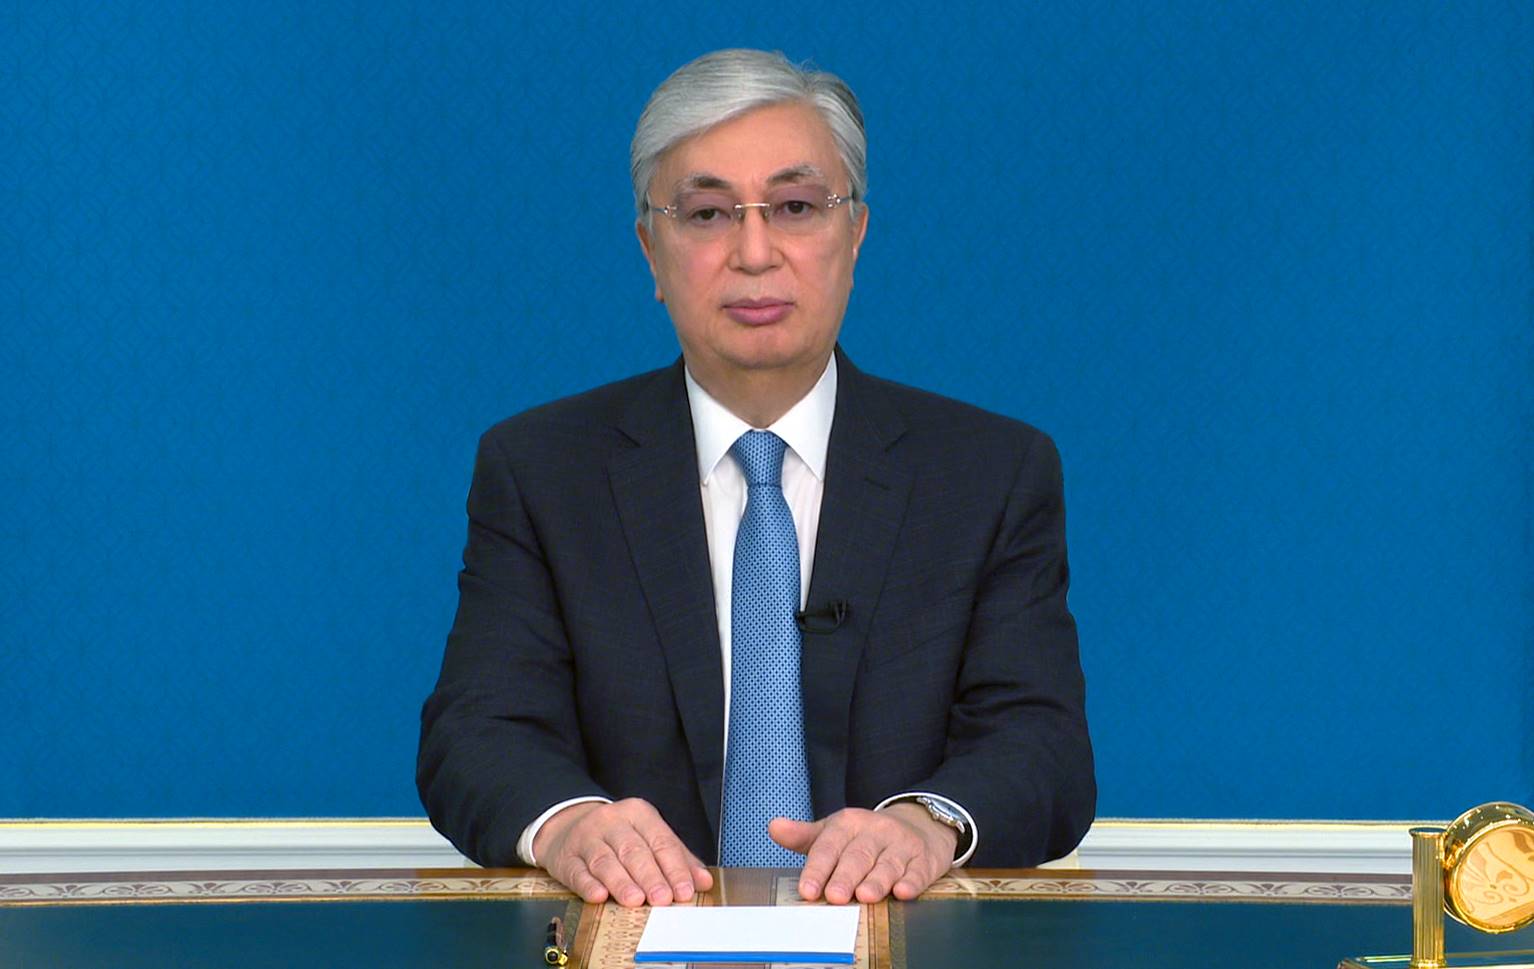 President Kassym-Jomart Tokayev’s Address to the People: “Today a New Era Has Begun In The History of Independent Kazakhstan”